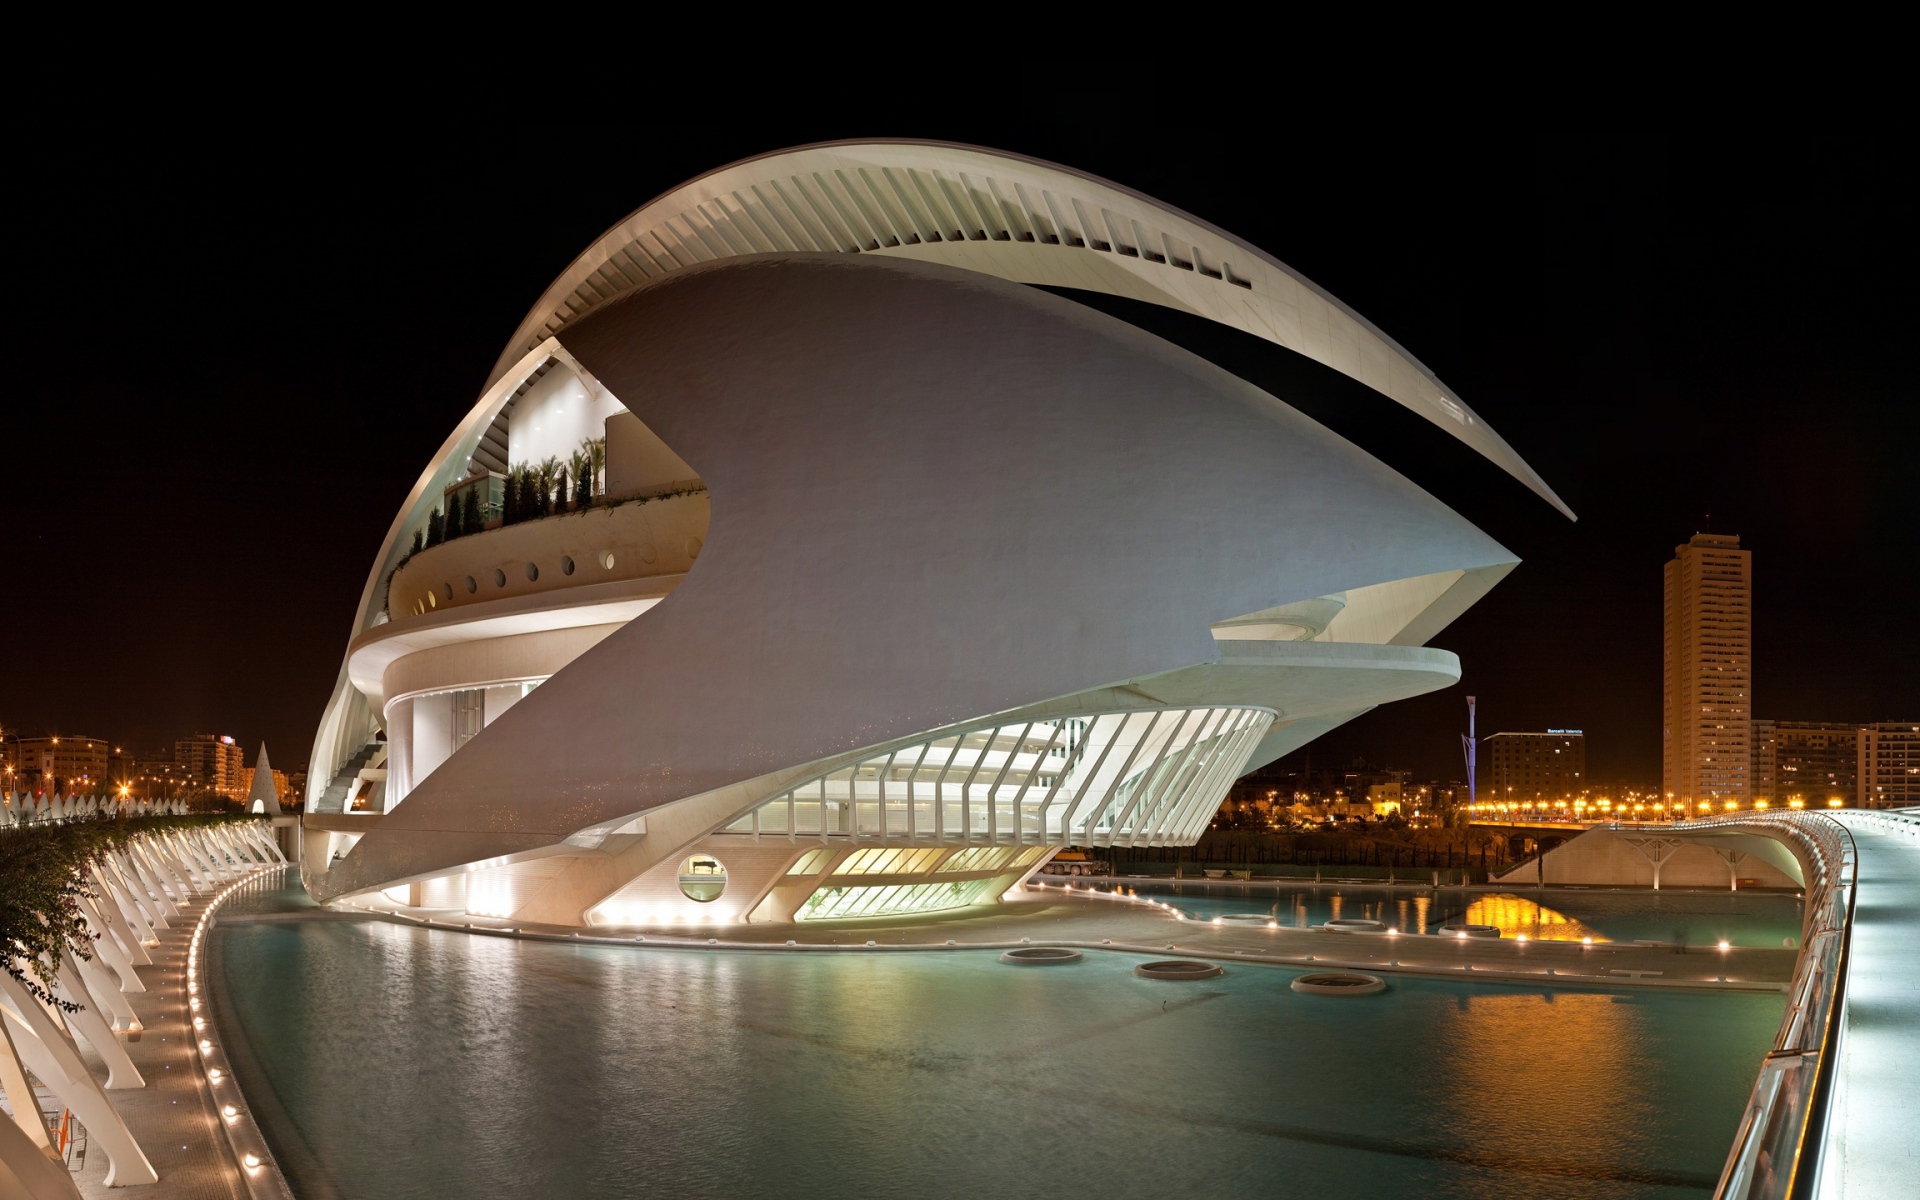 man made, valencia, architecture, spain, cities